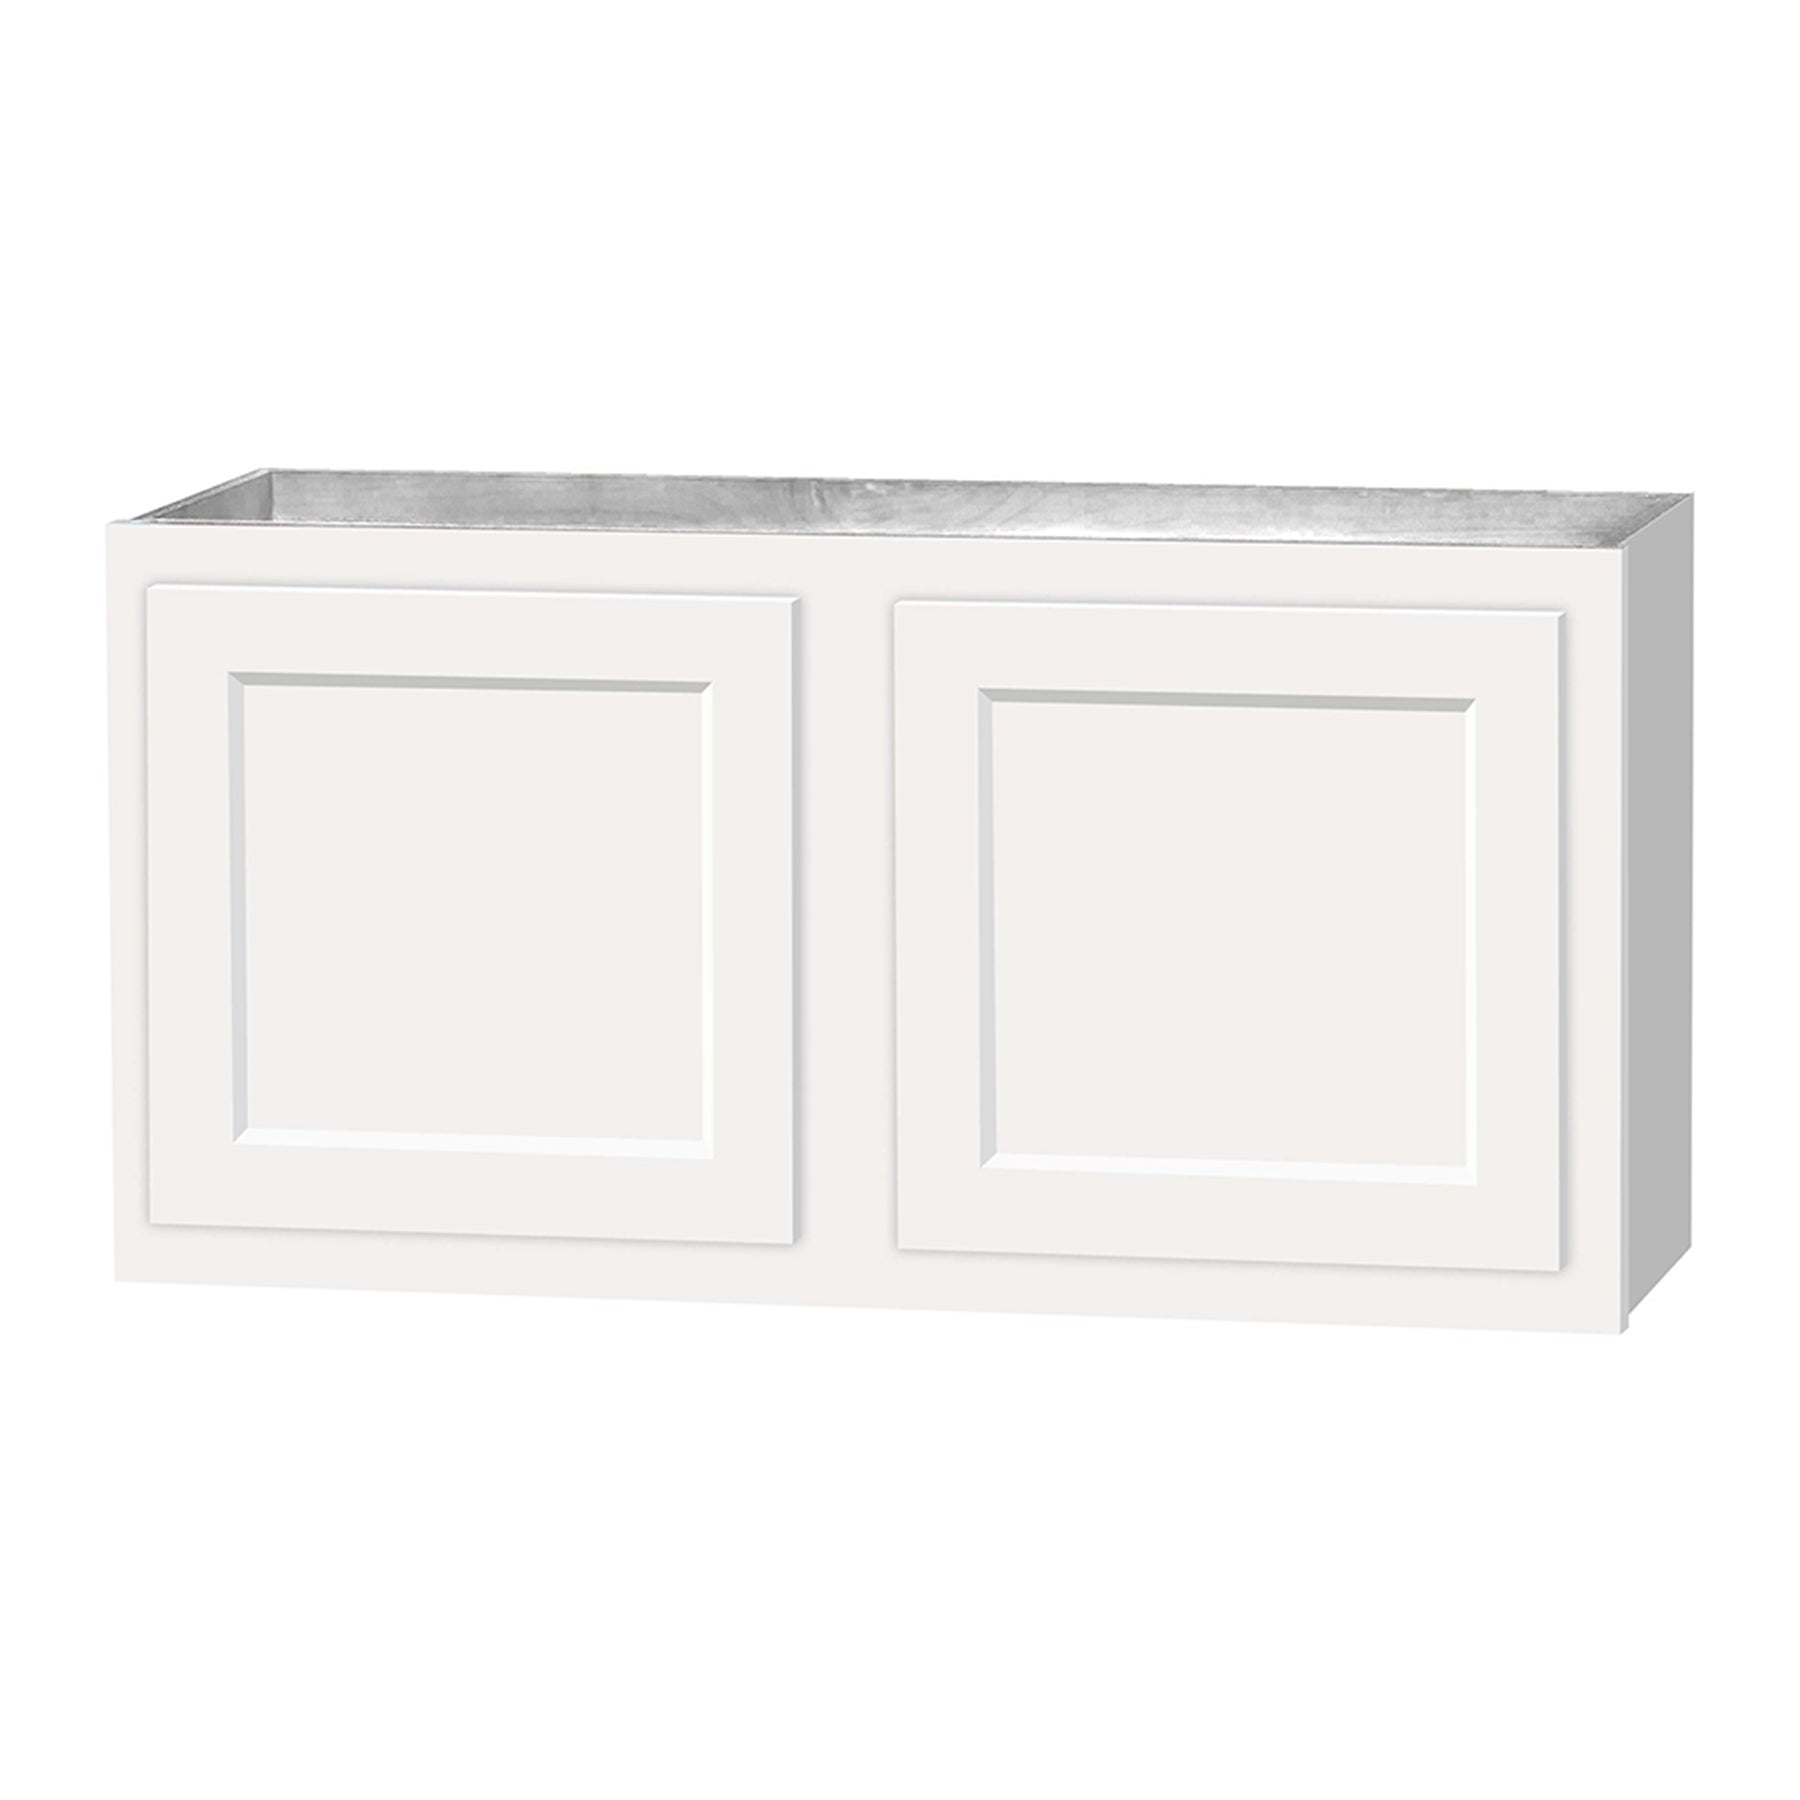 18 inch Wall Cabinets - Dwhite Shaker - 36 Inch W x 18 Inch H x 12 Inch D